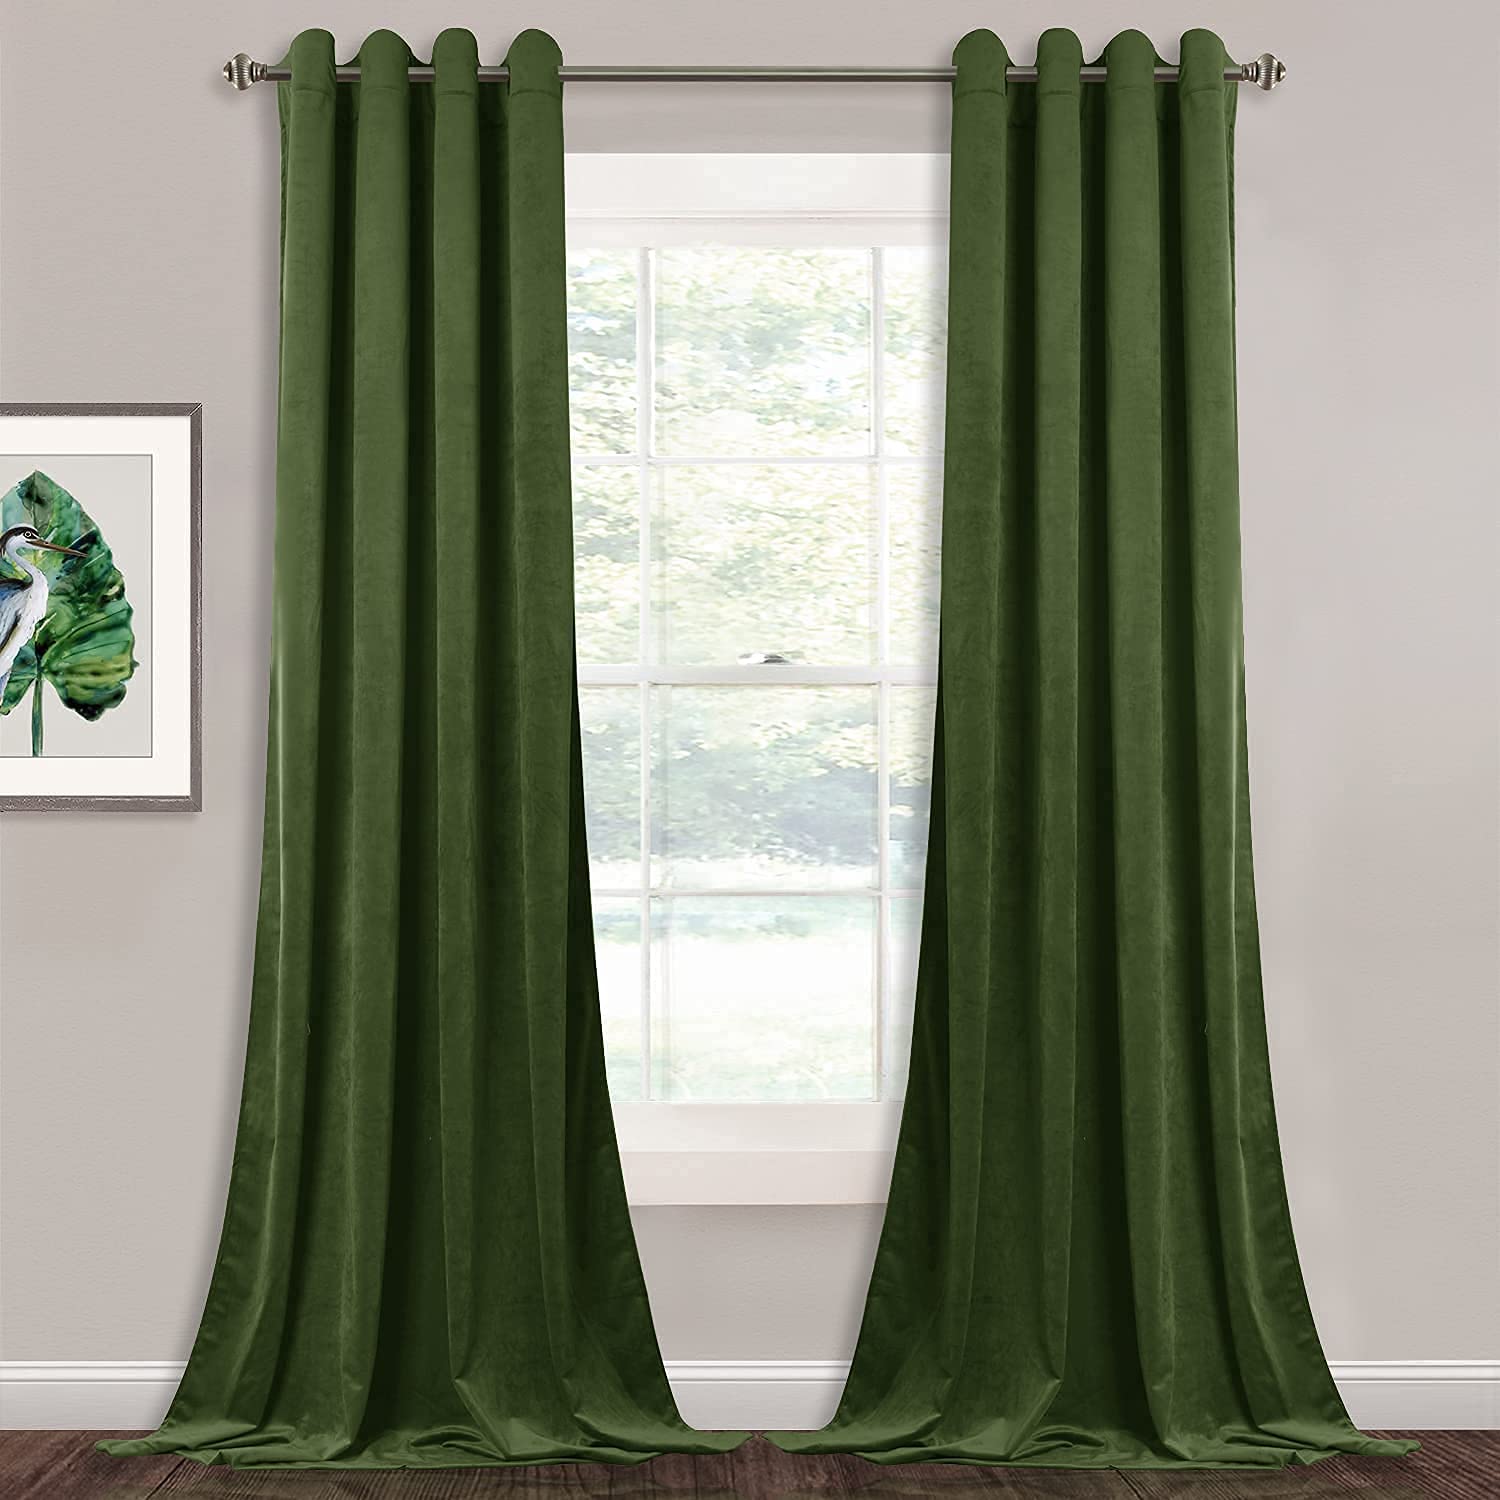 Grommet Velvet Privacy Protect Blackout Curtains For Bedroom And Living Room 2 Panels KGORGE Store